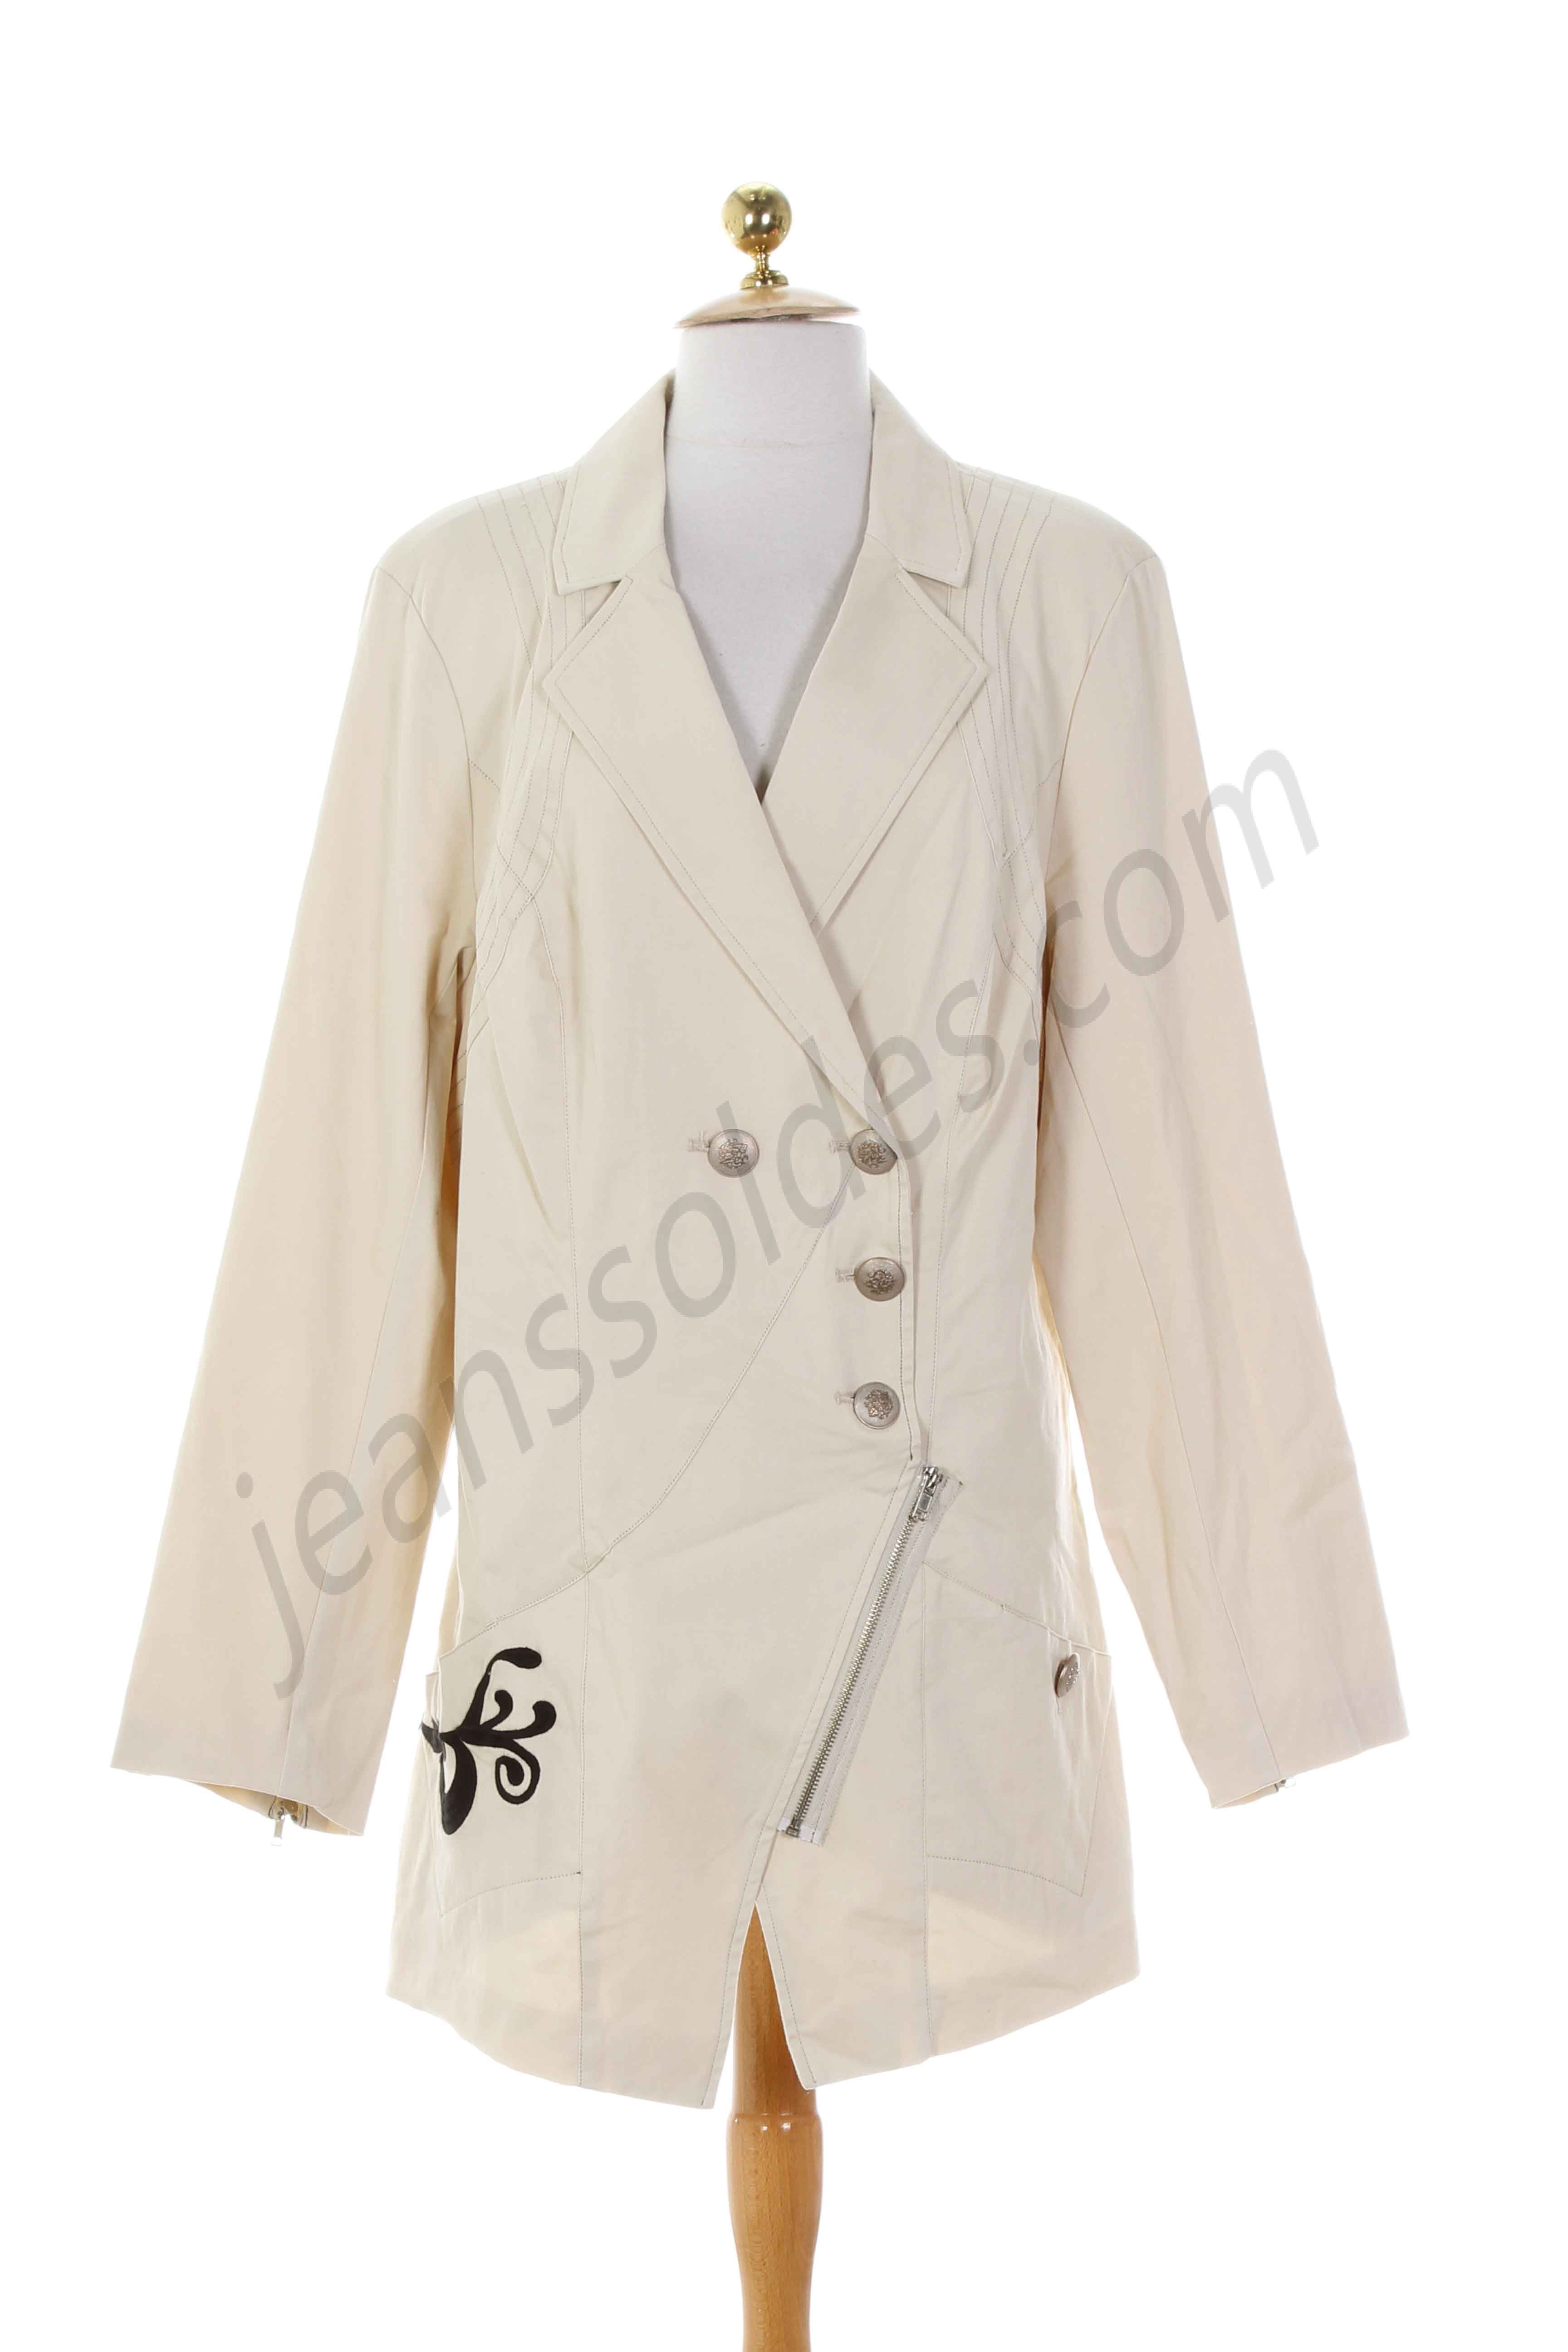 be the queen-Manteau long prix d’amis - be the queen-Manteau long prix d’amis